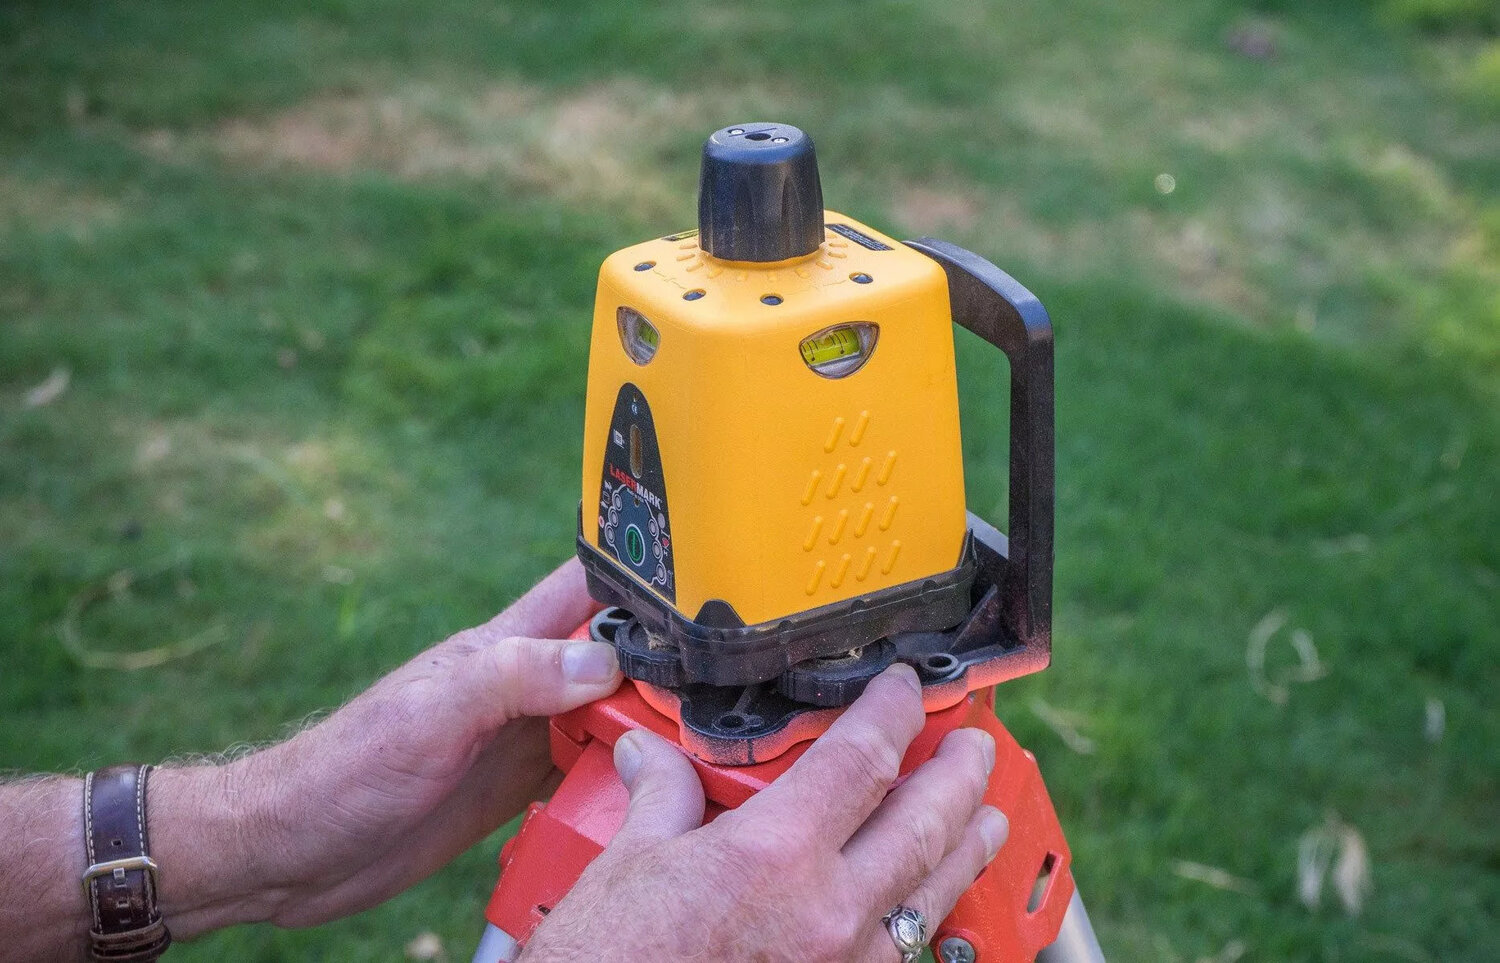 How To Repair A LM30 Laser Level